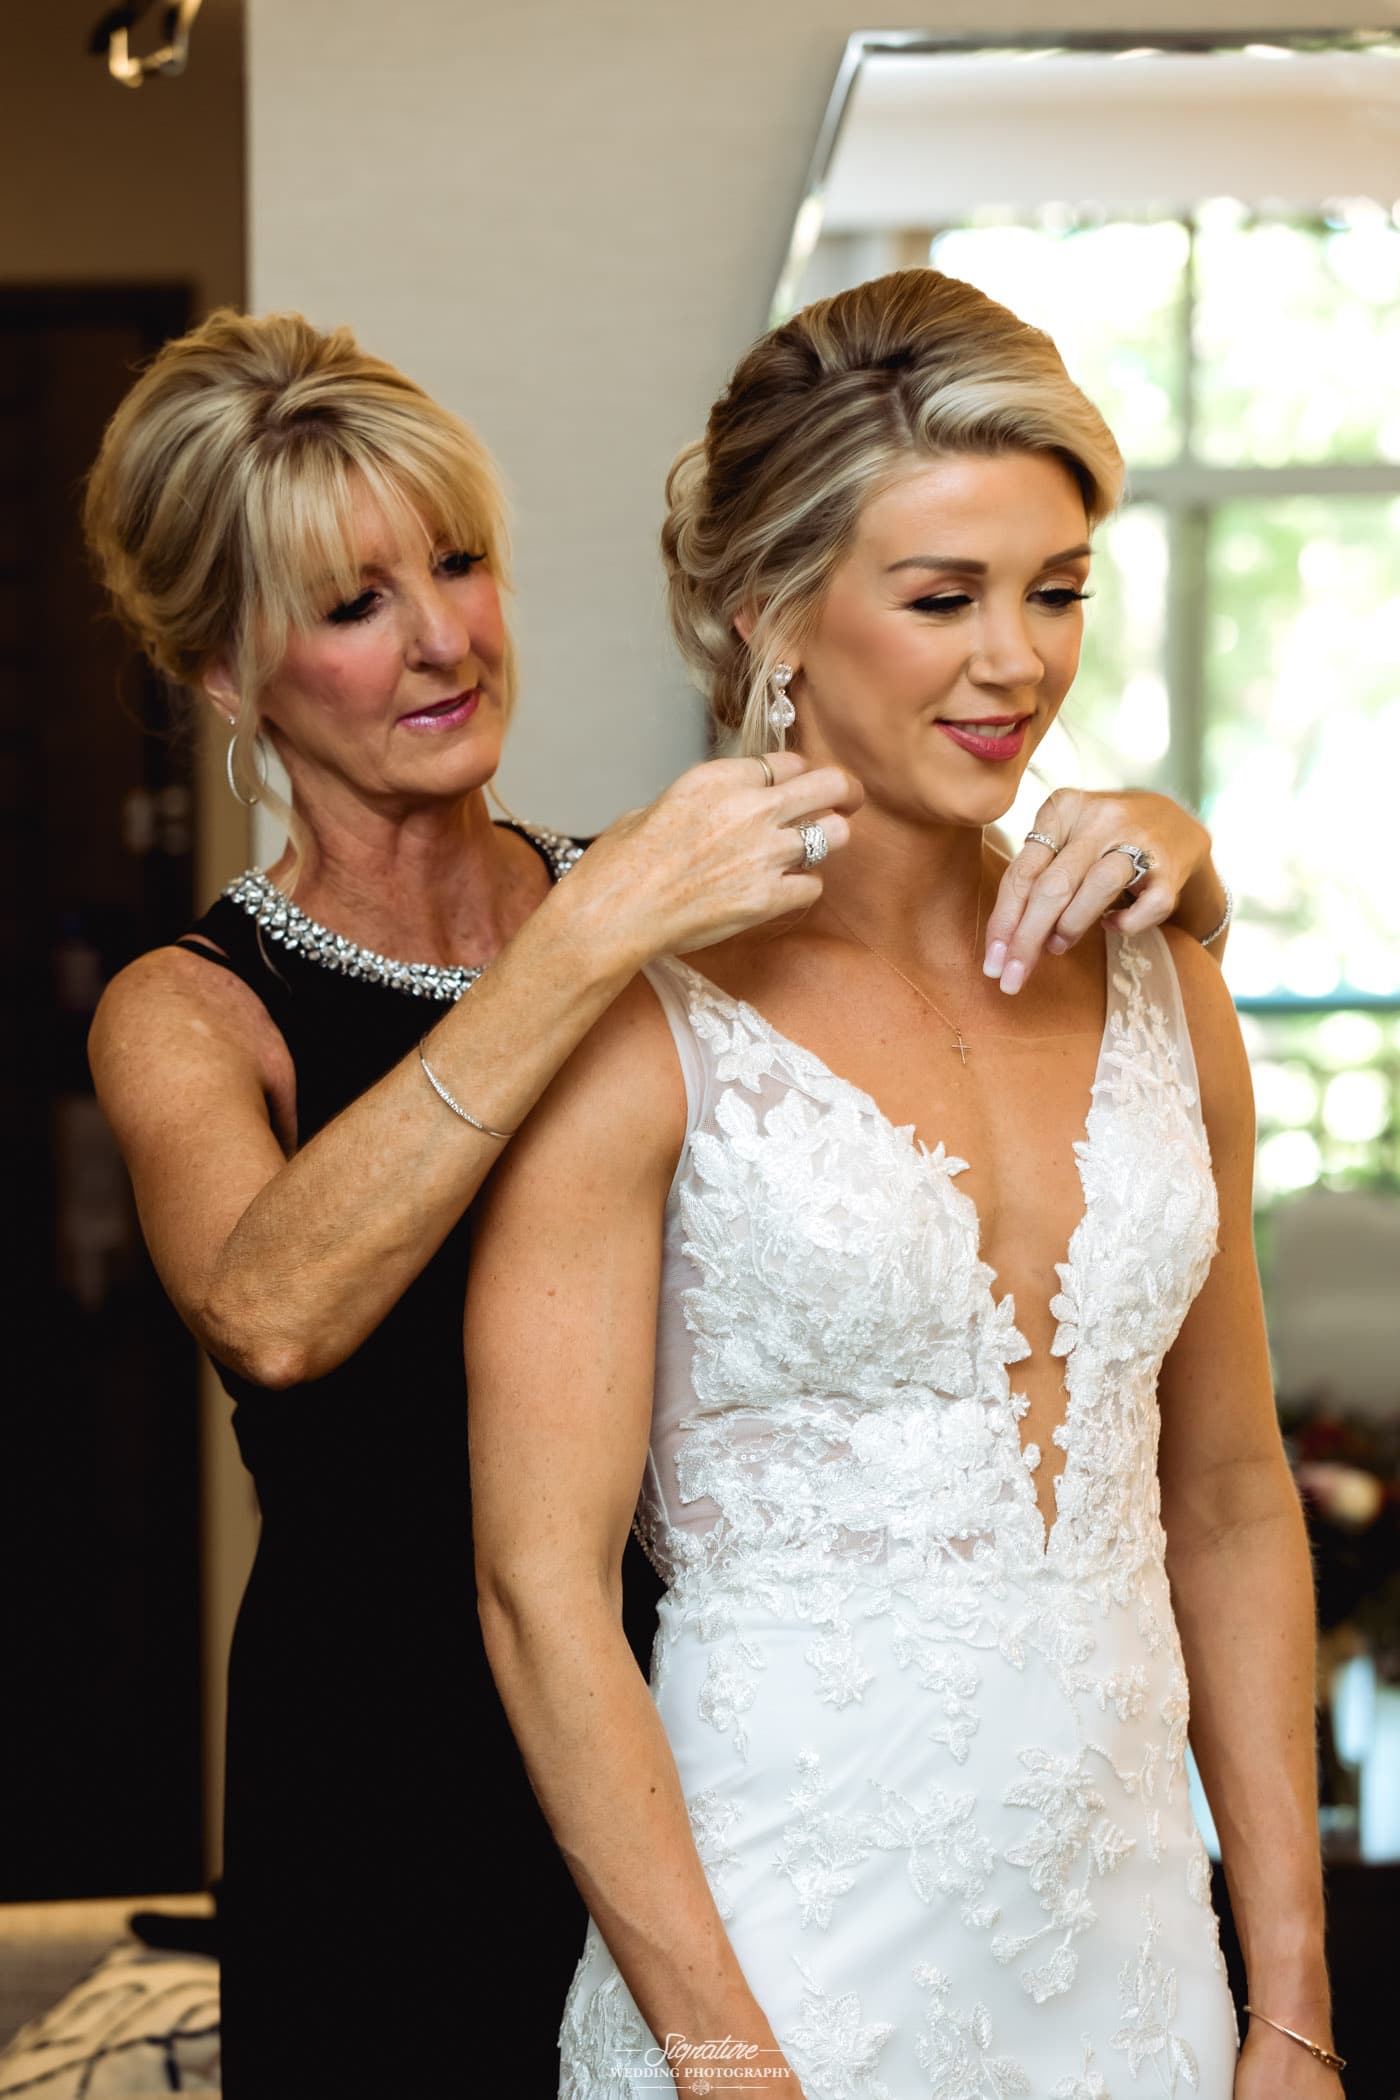 Mom fixing bride's earrings from over shoulder